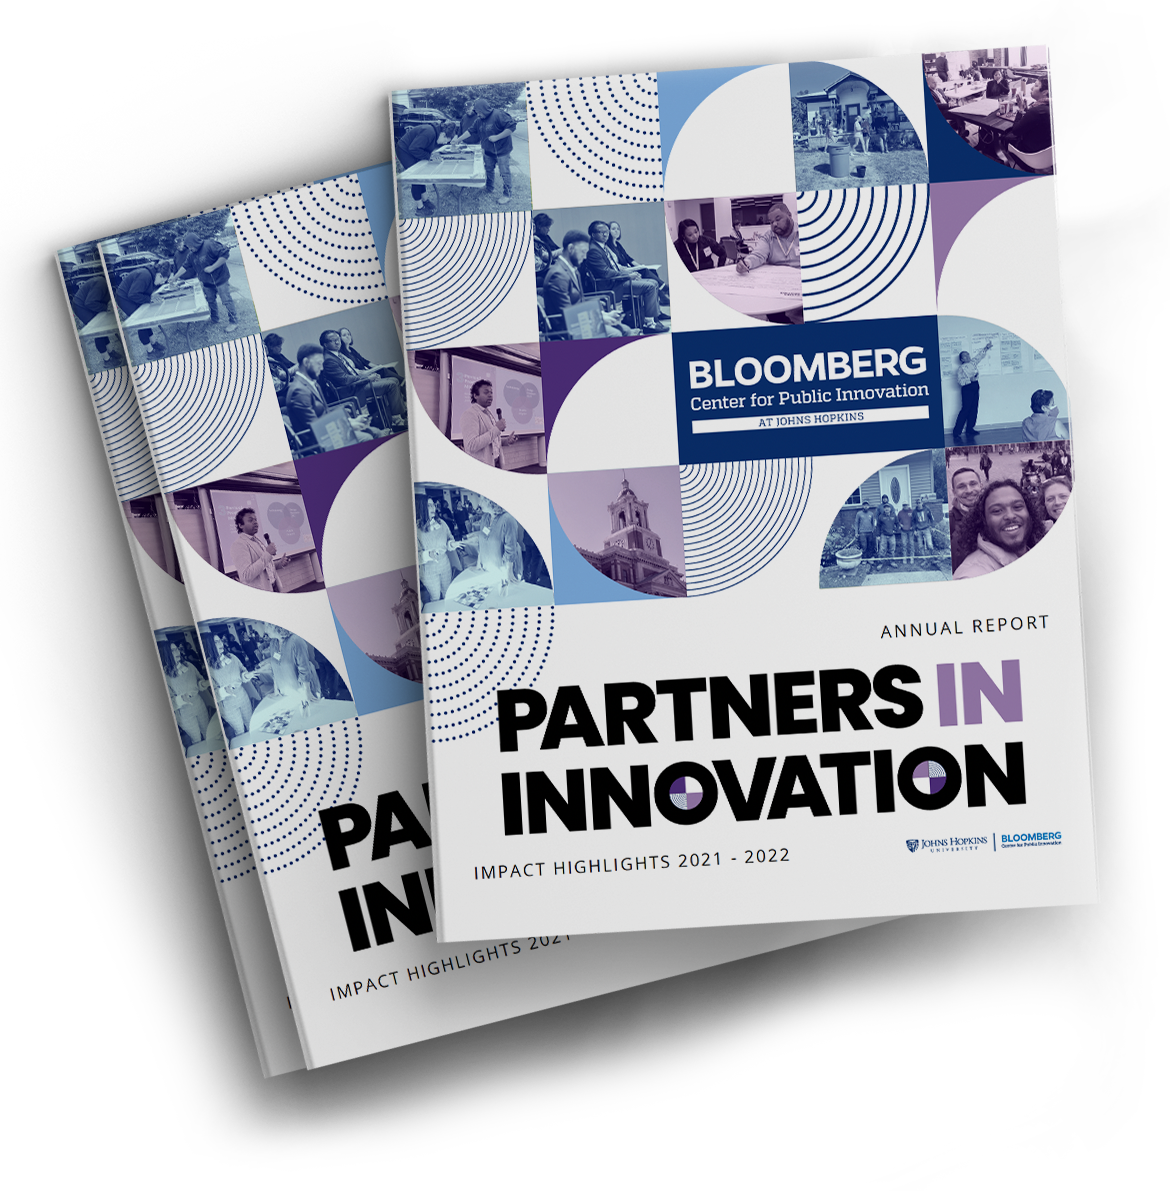 Partners in Innovation, Bloomberg Center for Public Innovation 2022-2023 Annual Report